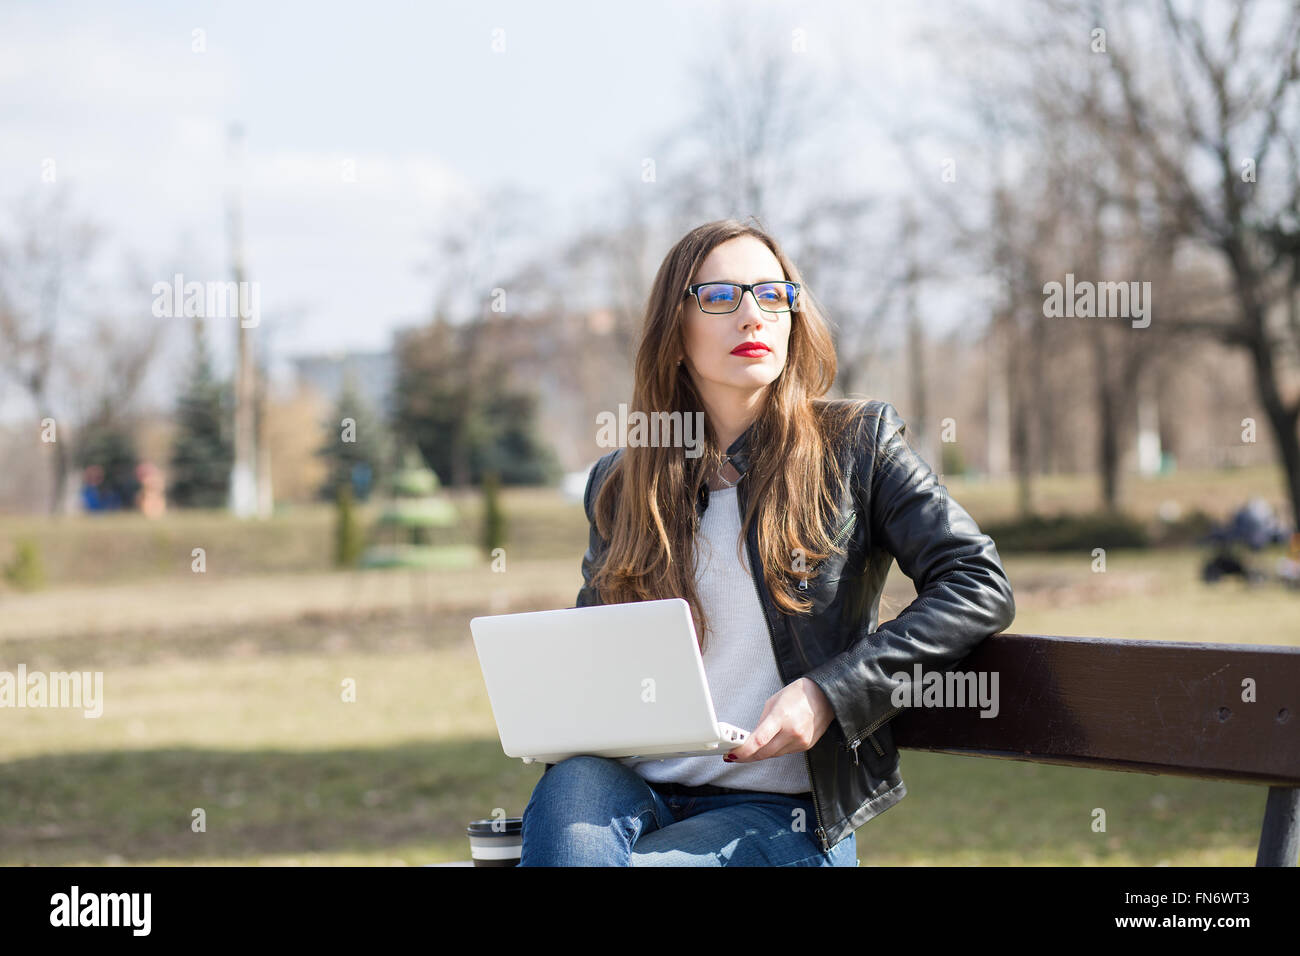 Young woman in glasses using laptop sitting on the bench in city park. Outdoor workplace background Stock Photo